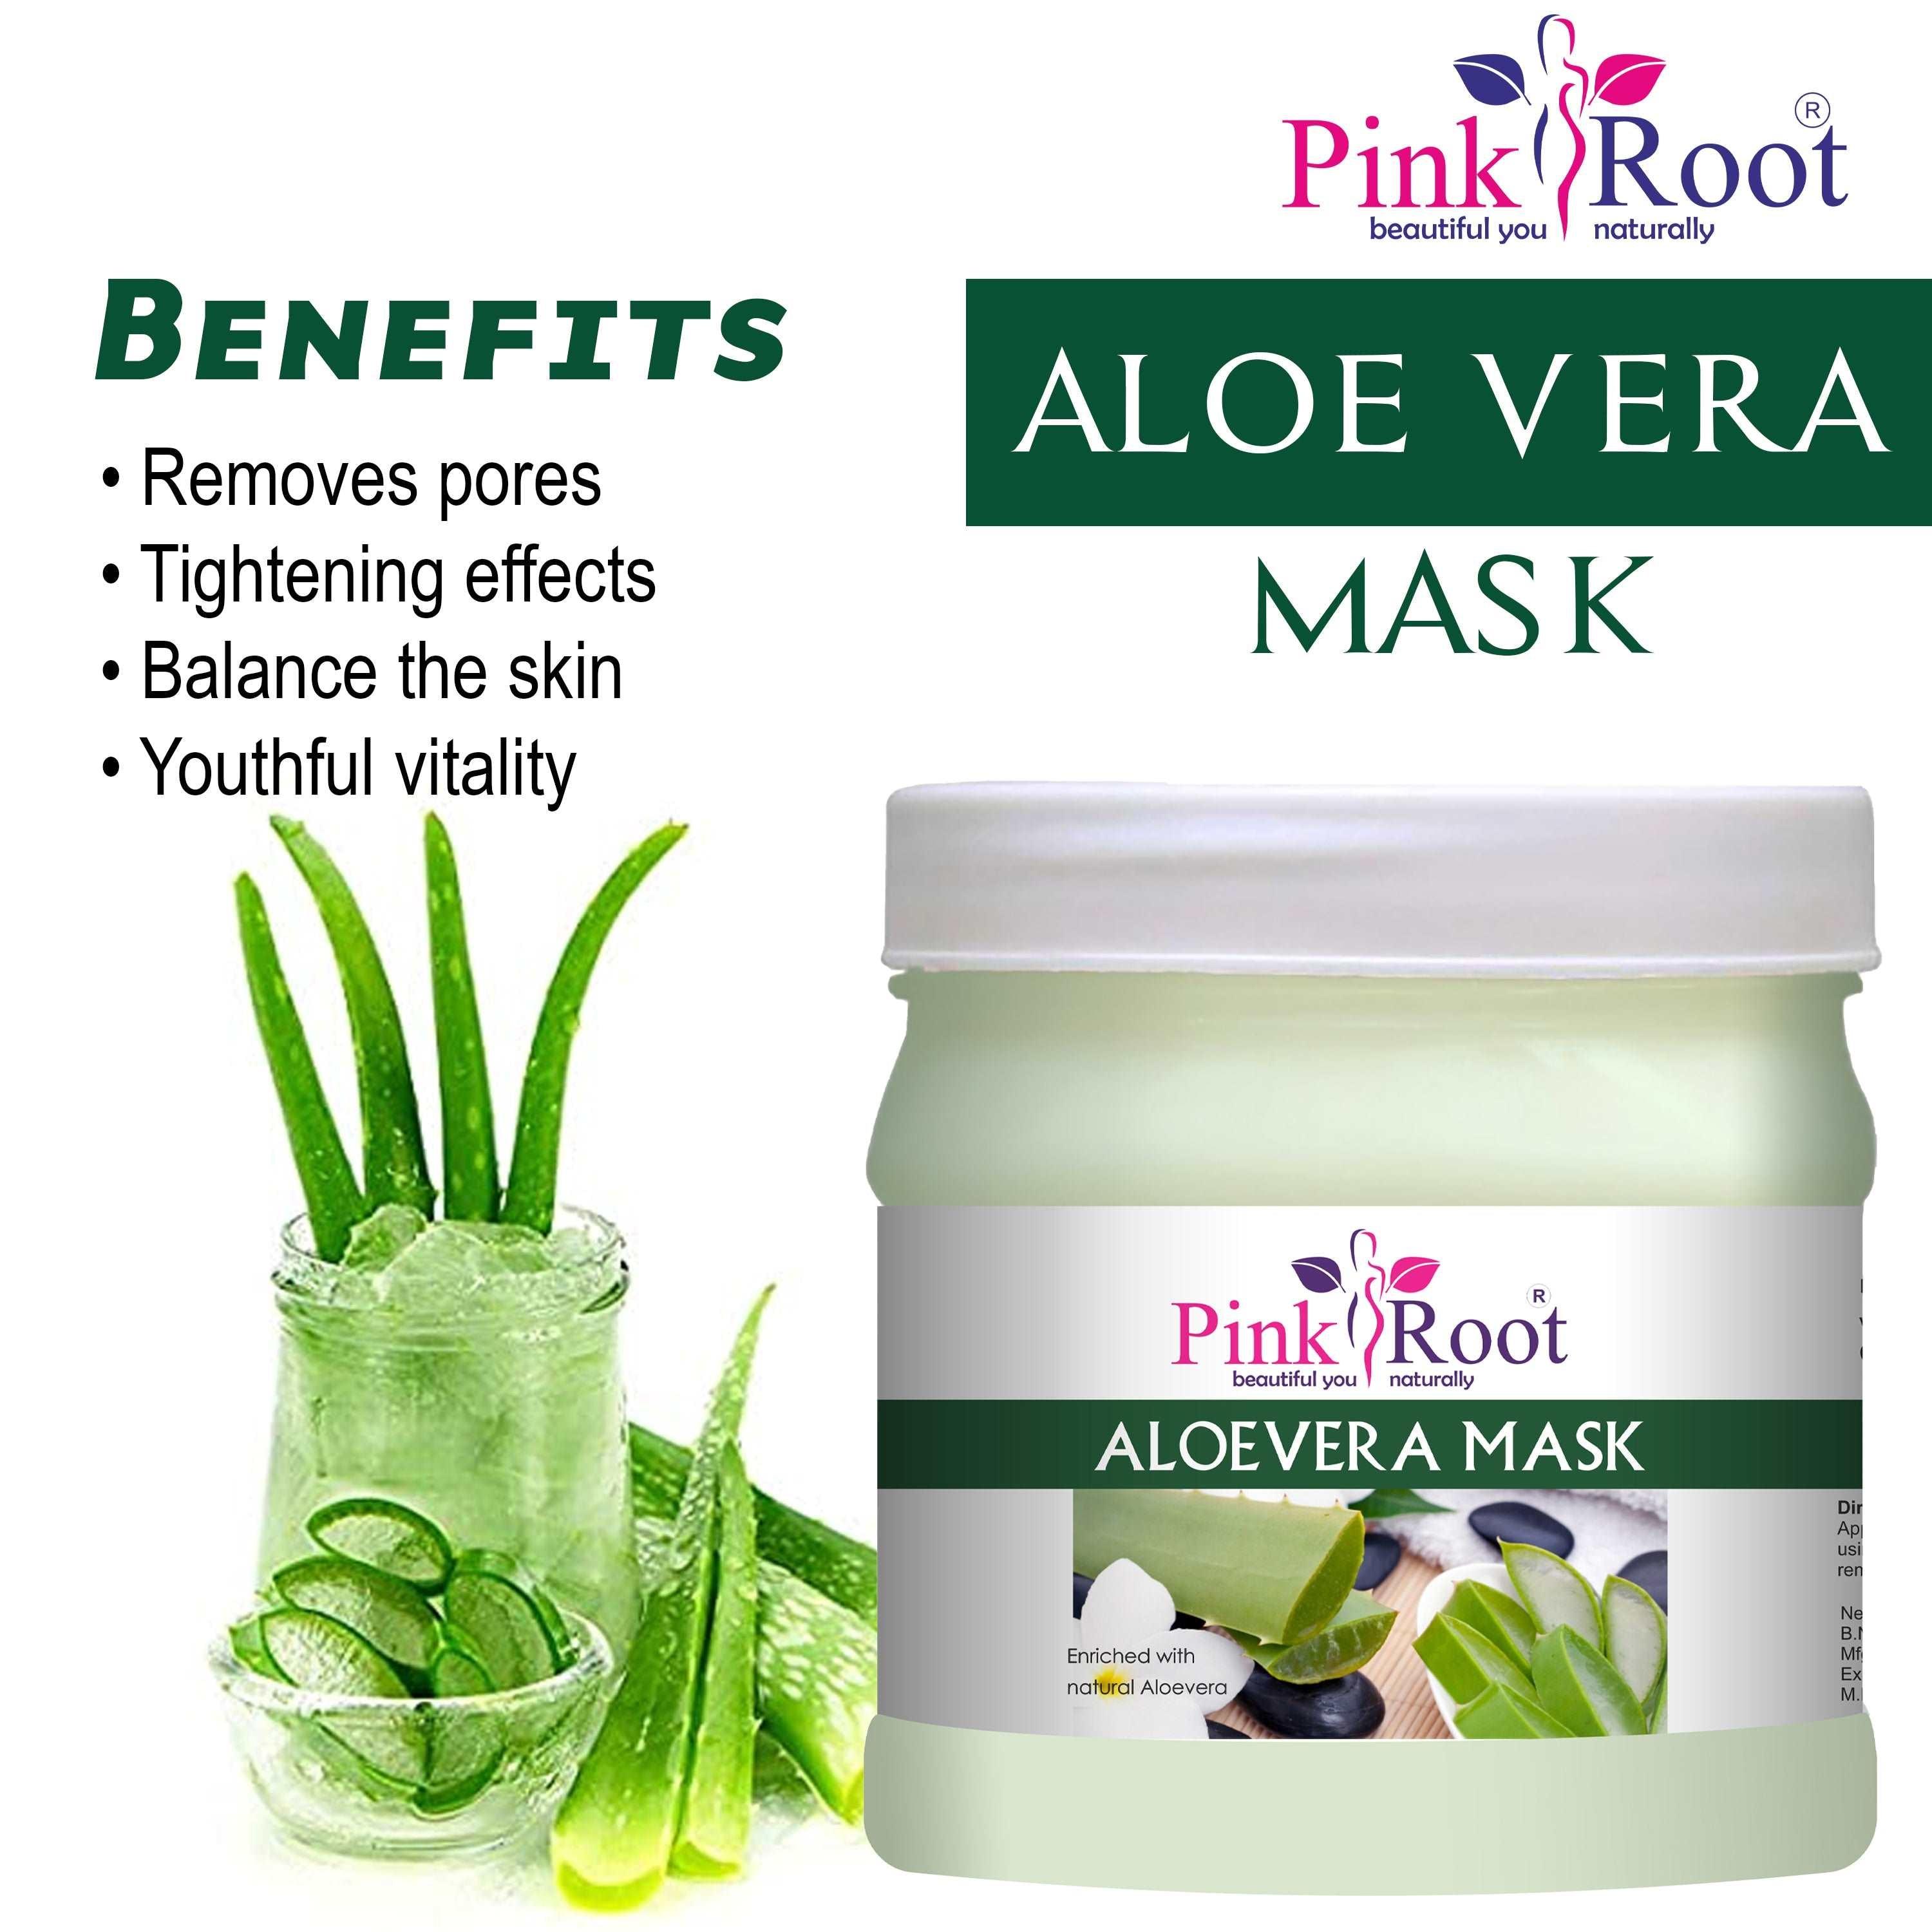 Aloevera Mask Enriched with Aloevera Extract and Vitamin E Oil 500gm